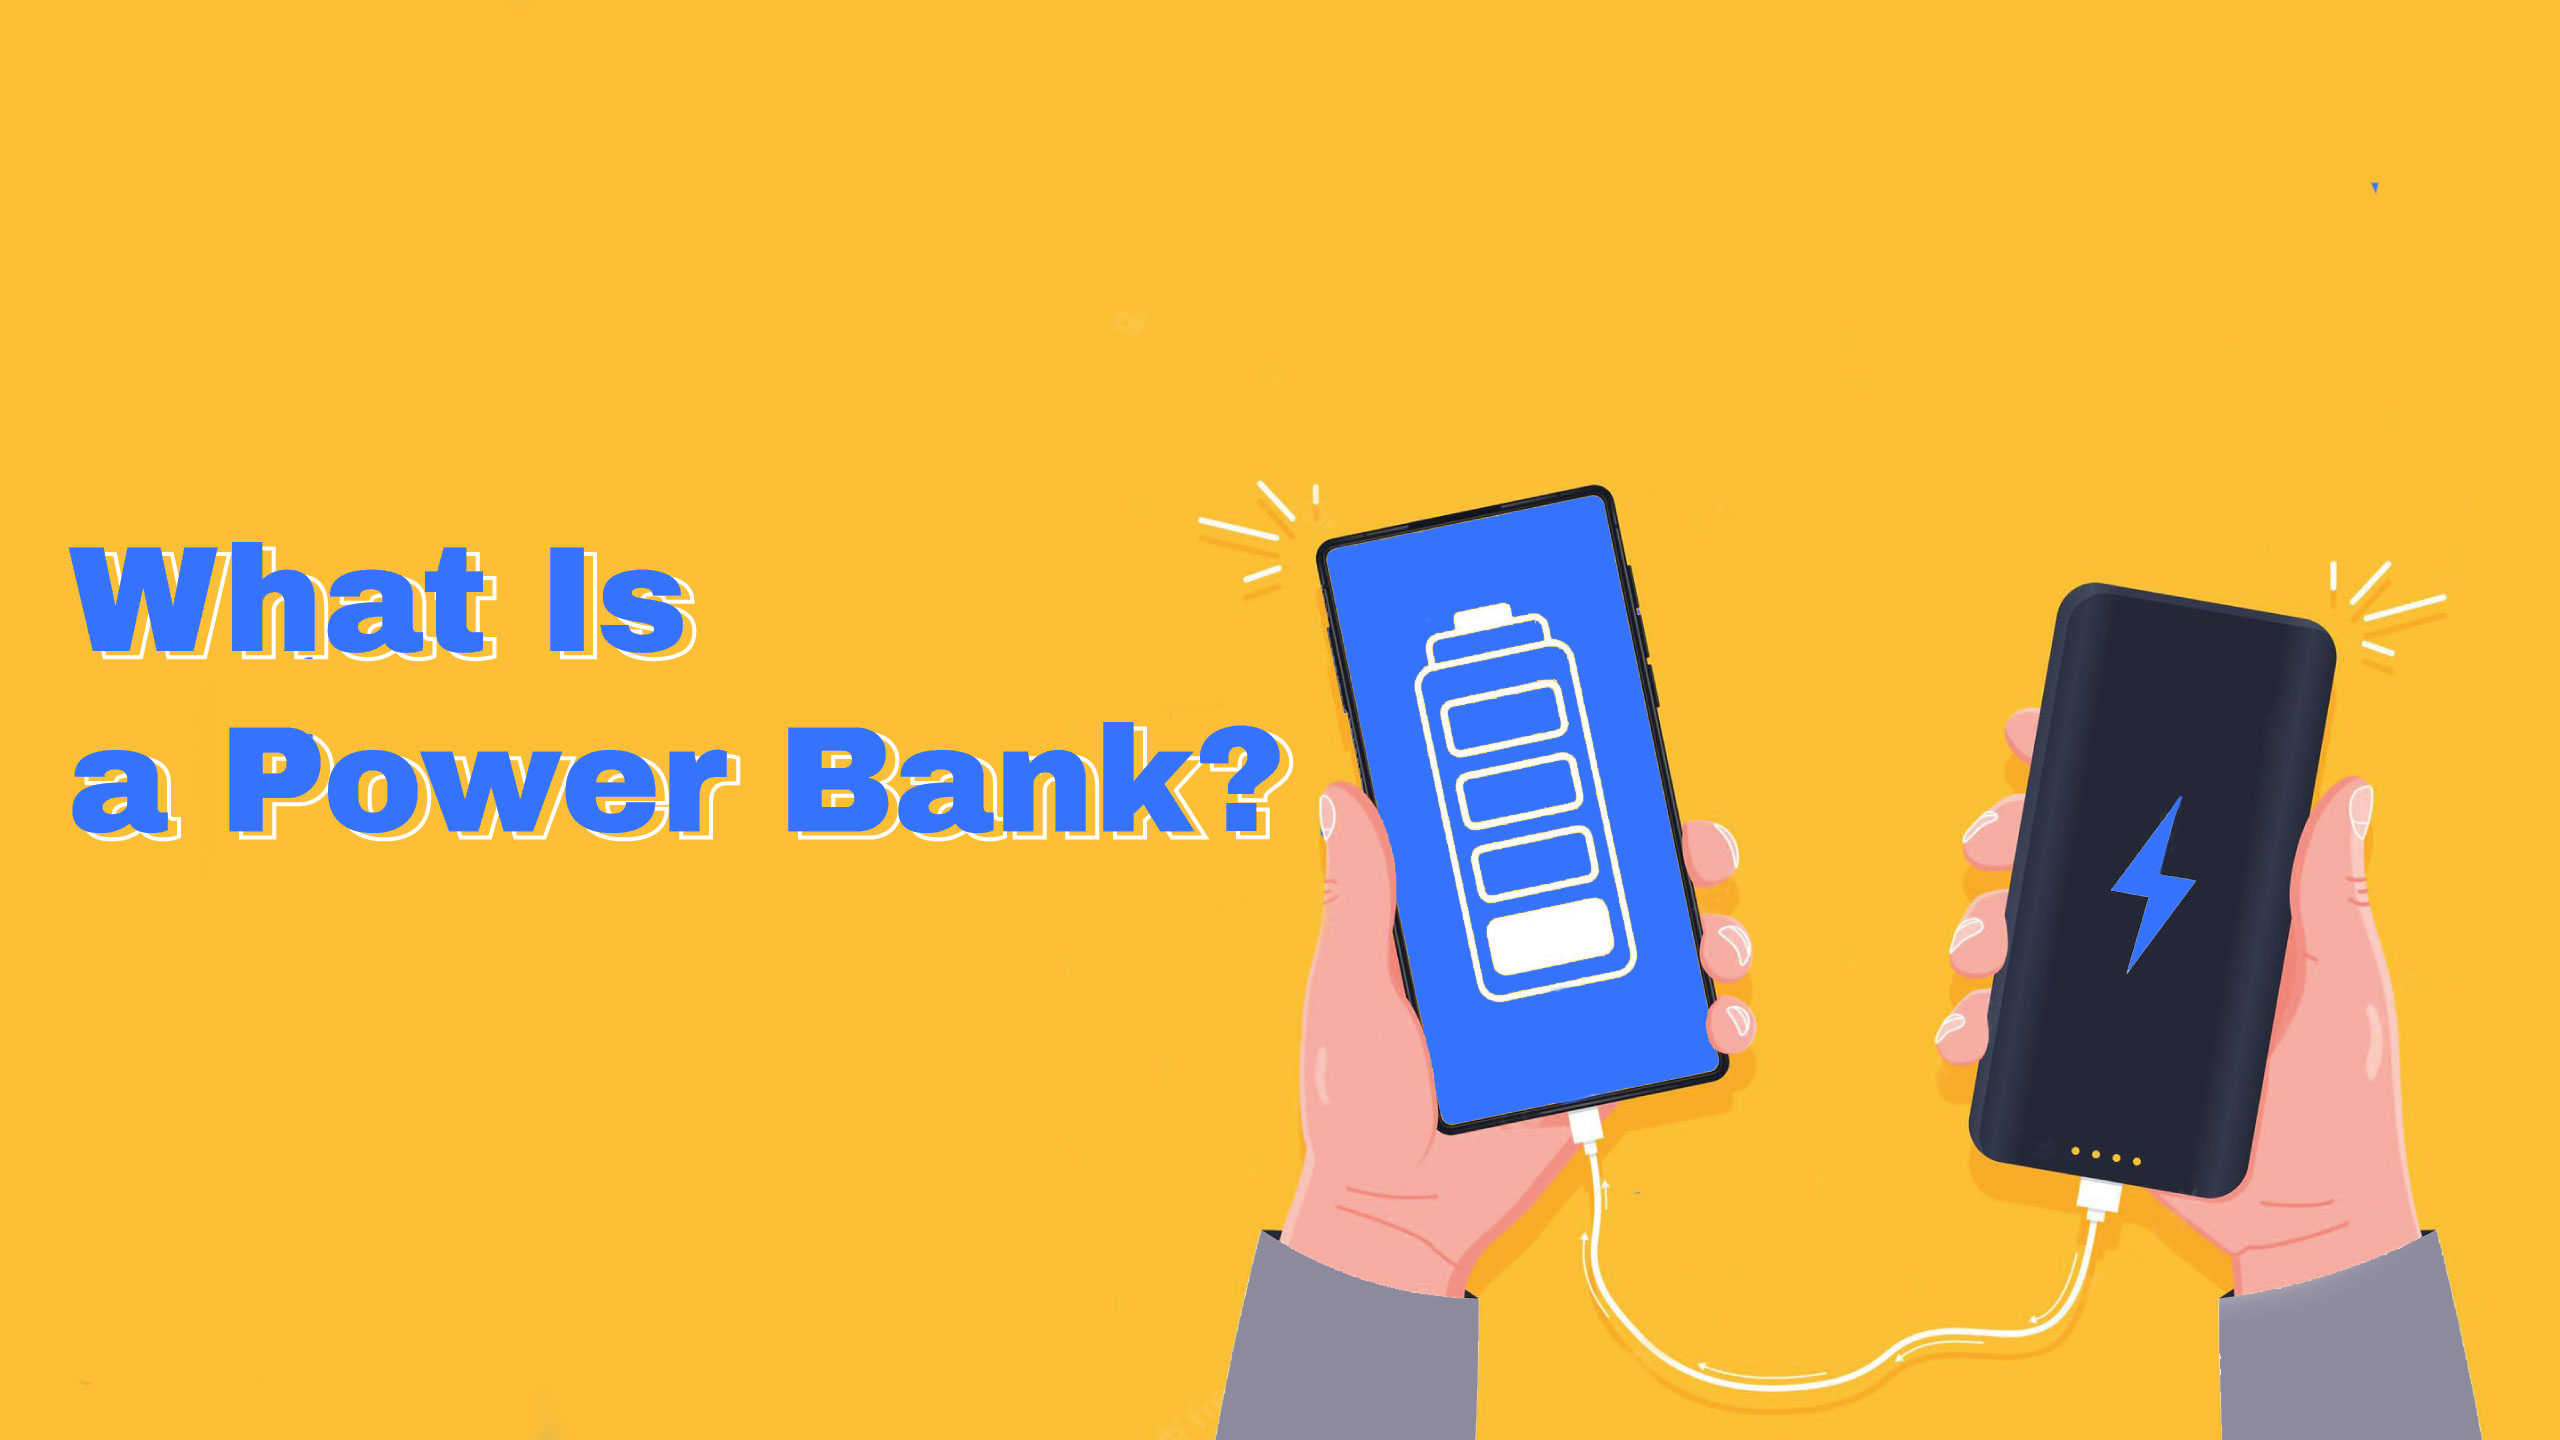 Power banks are immensely important in our modern world. Learn all about them and how to keep your devices charged no matter the circumstances.